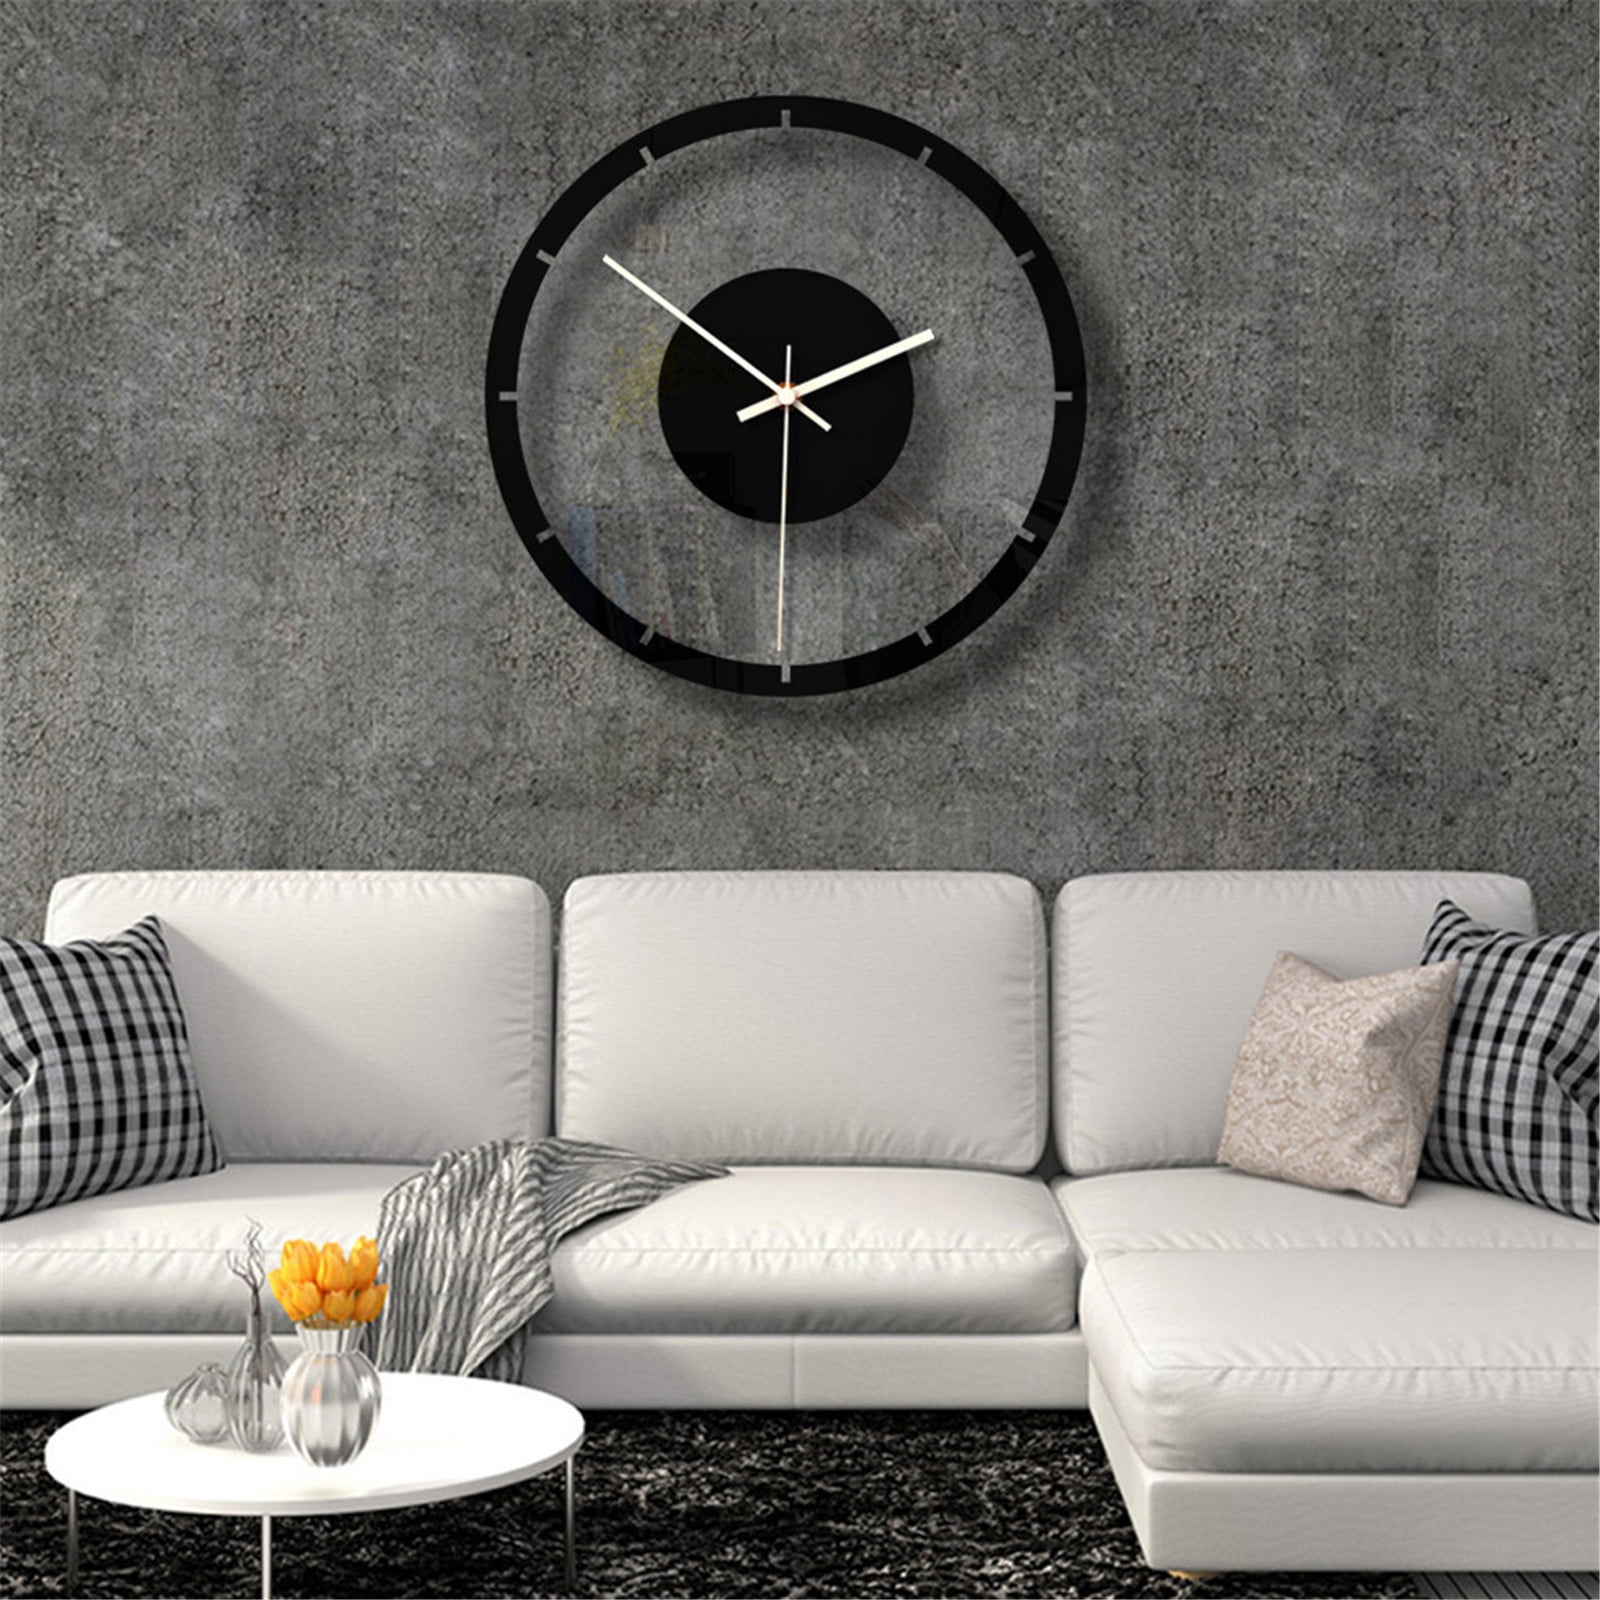 WALL CLOCK zen 25cm therapy relaxed calm yoga tranquil furniture home decor 373 